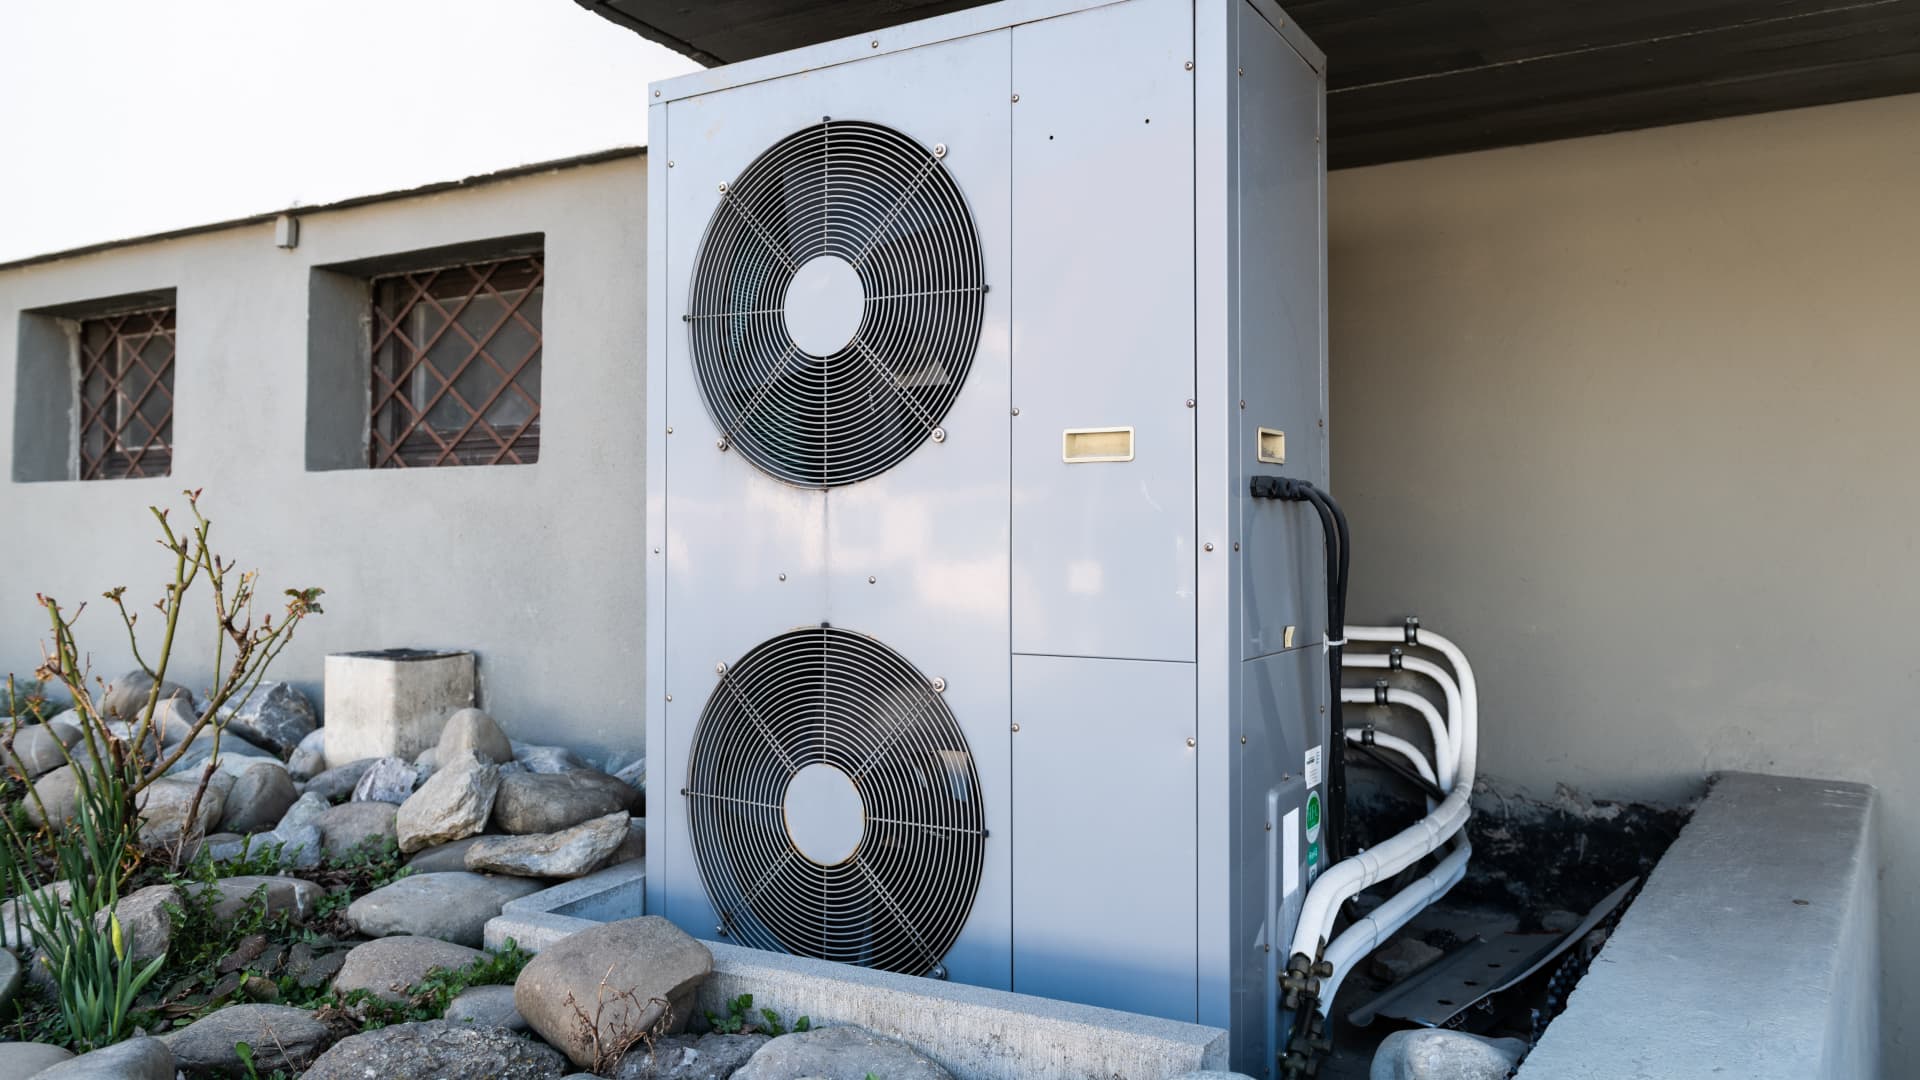 The ventilation system of a geothermal heat pump located in front of a residential building.